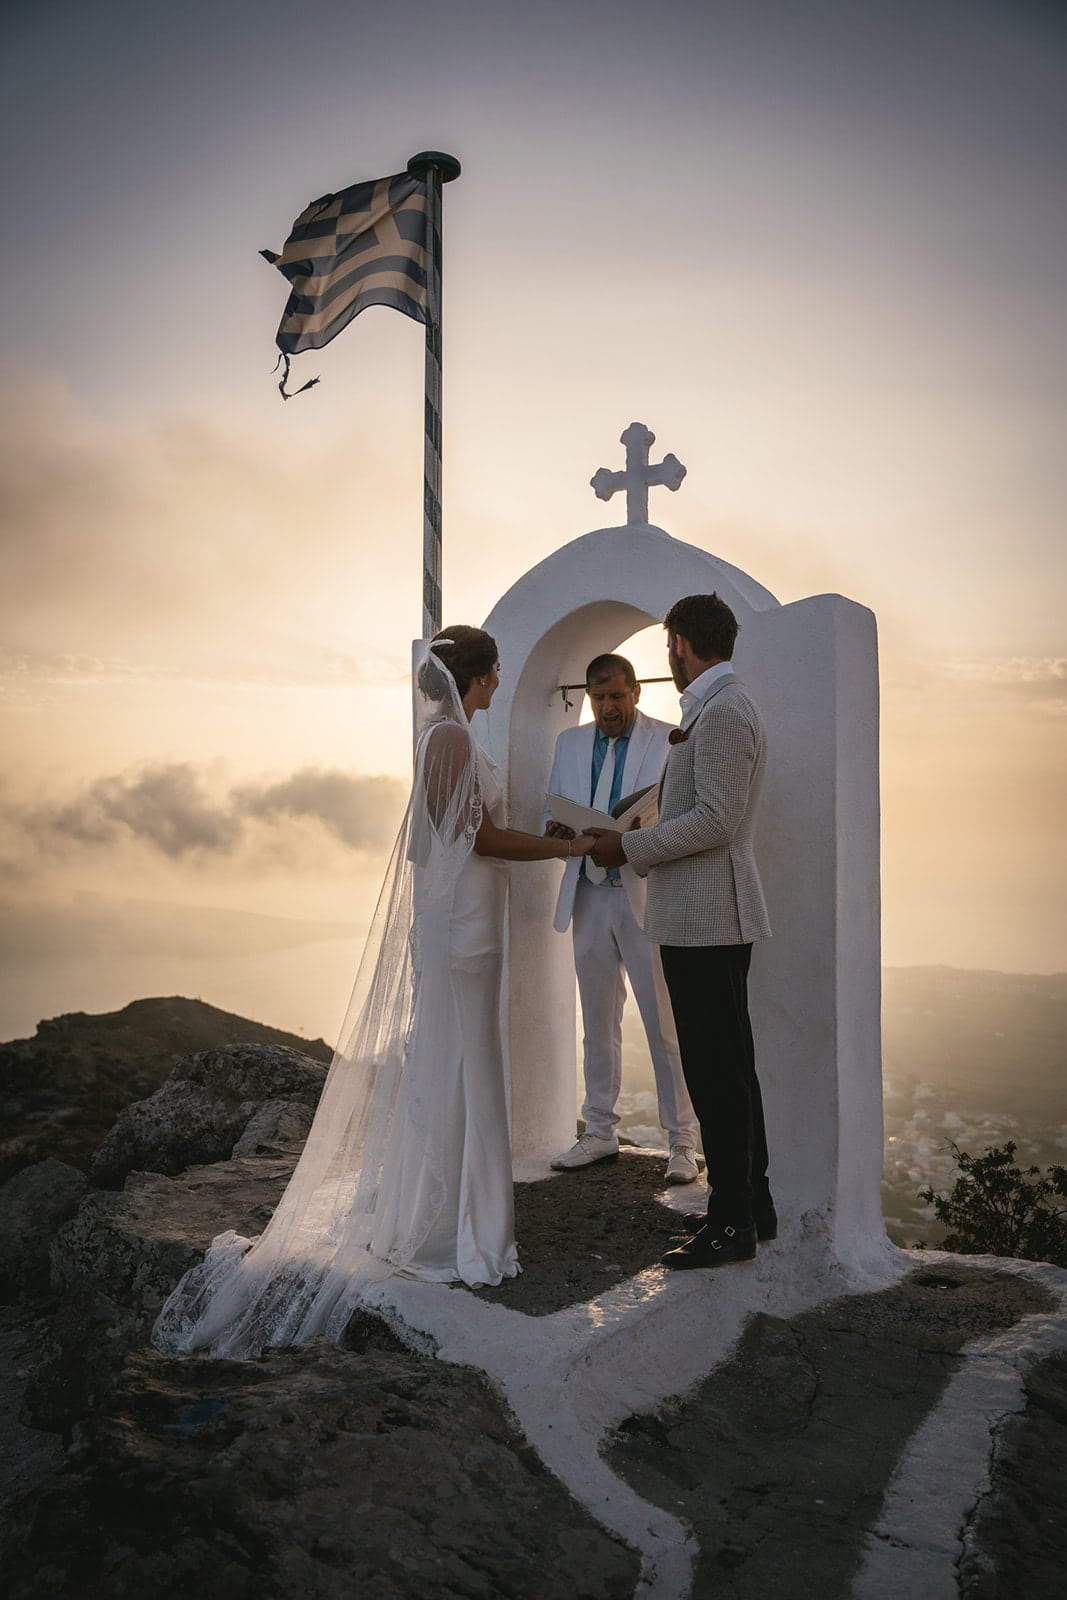 As the sun kisses the horizon, their vows are whispered, a perfect moment of unity